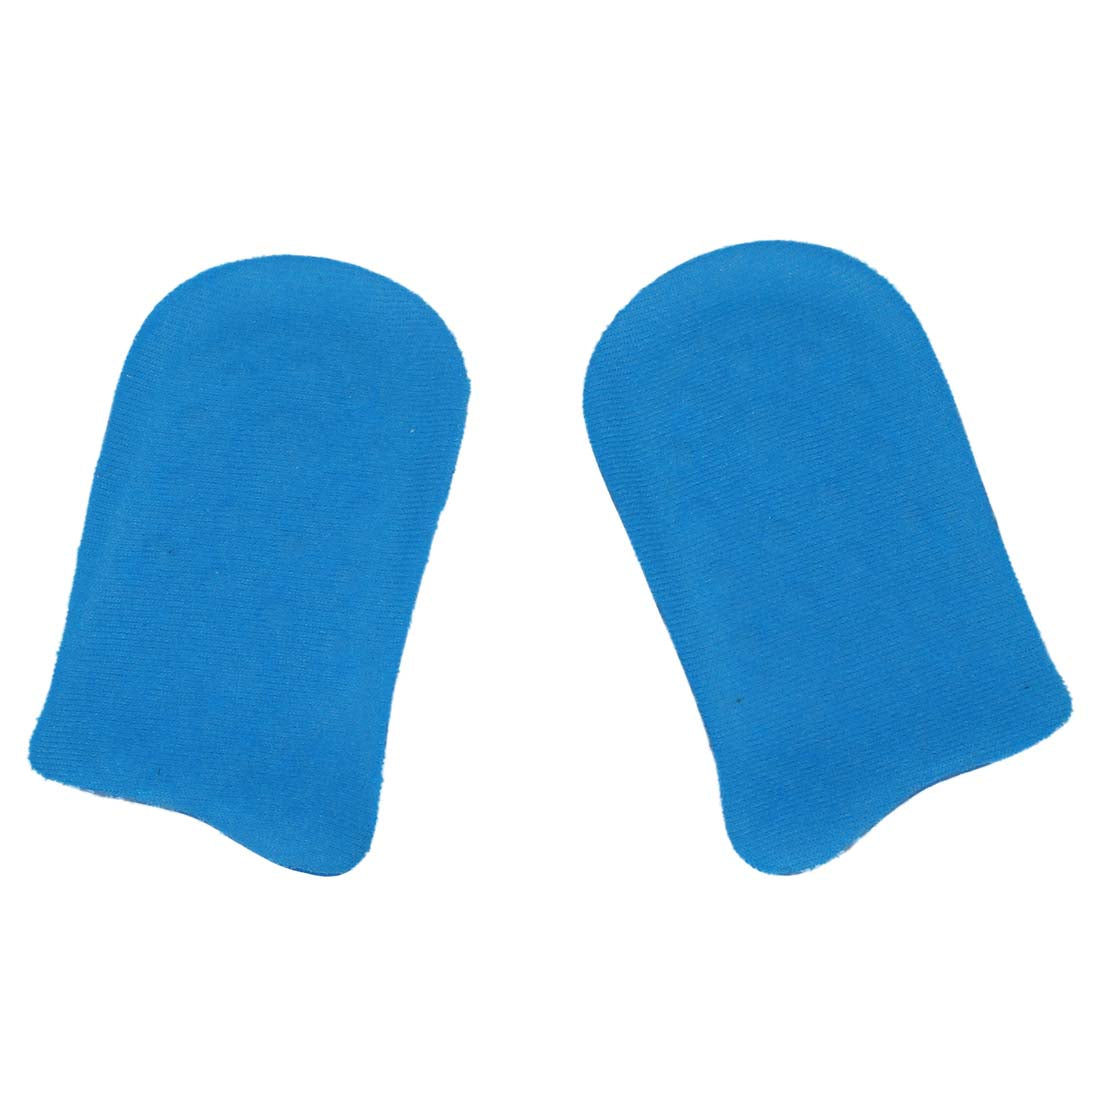 Pairlight Blue Silicone Gel Insole Best Heel Pad Insertion 4.3 cm Up - ebowsos